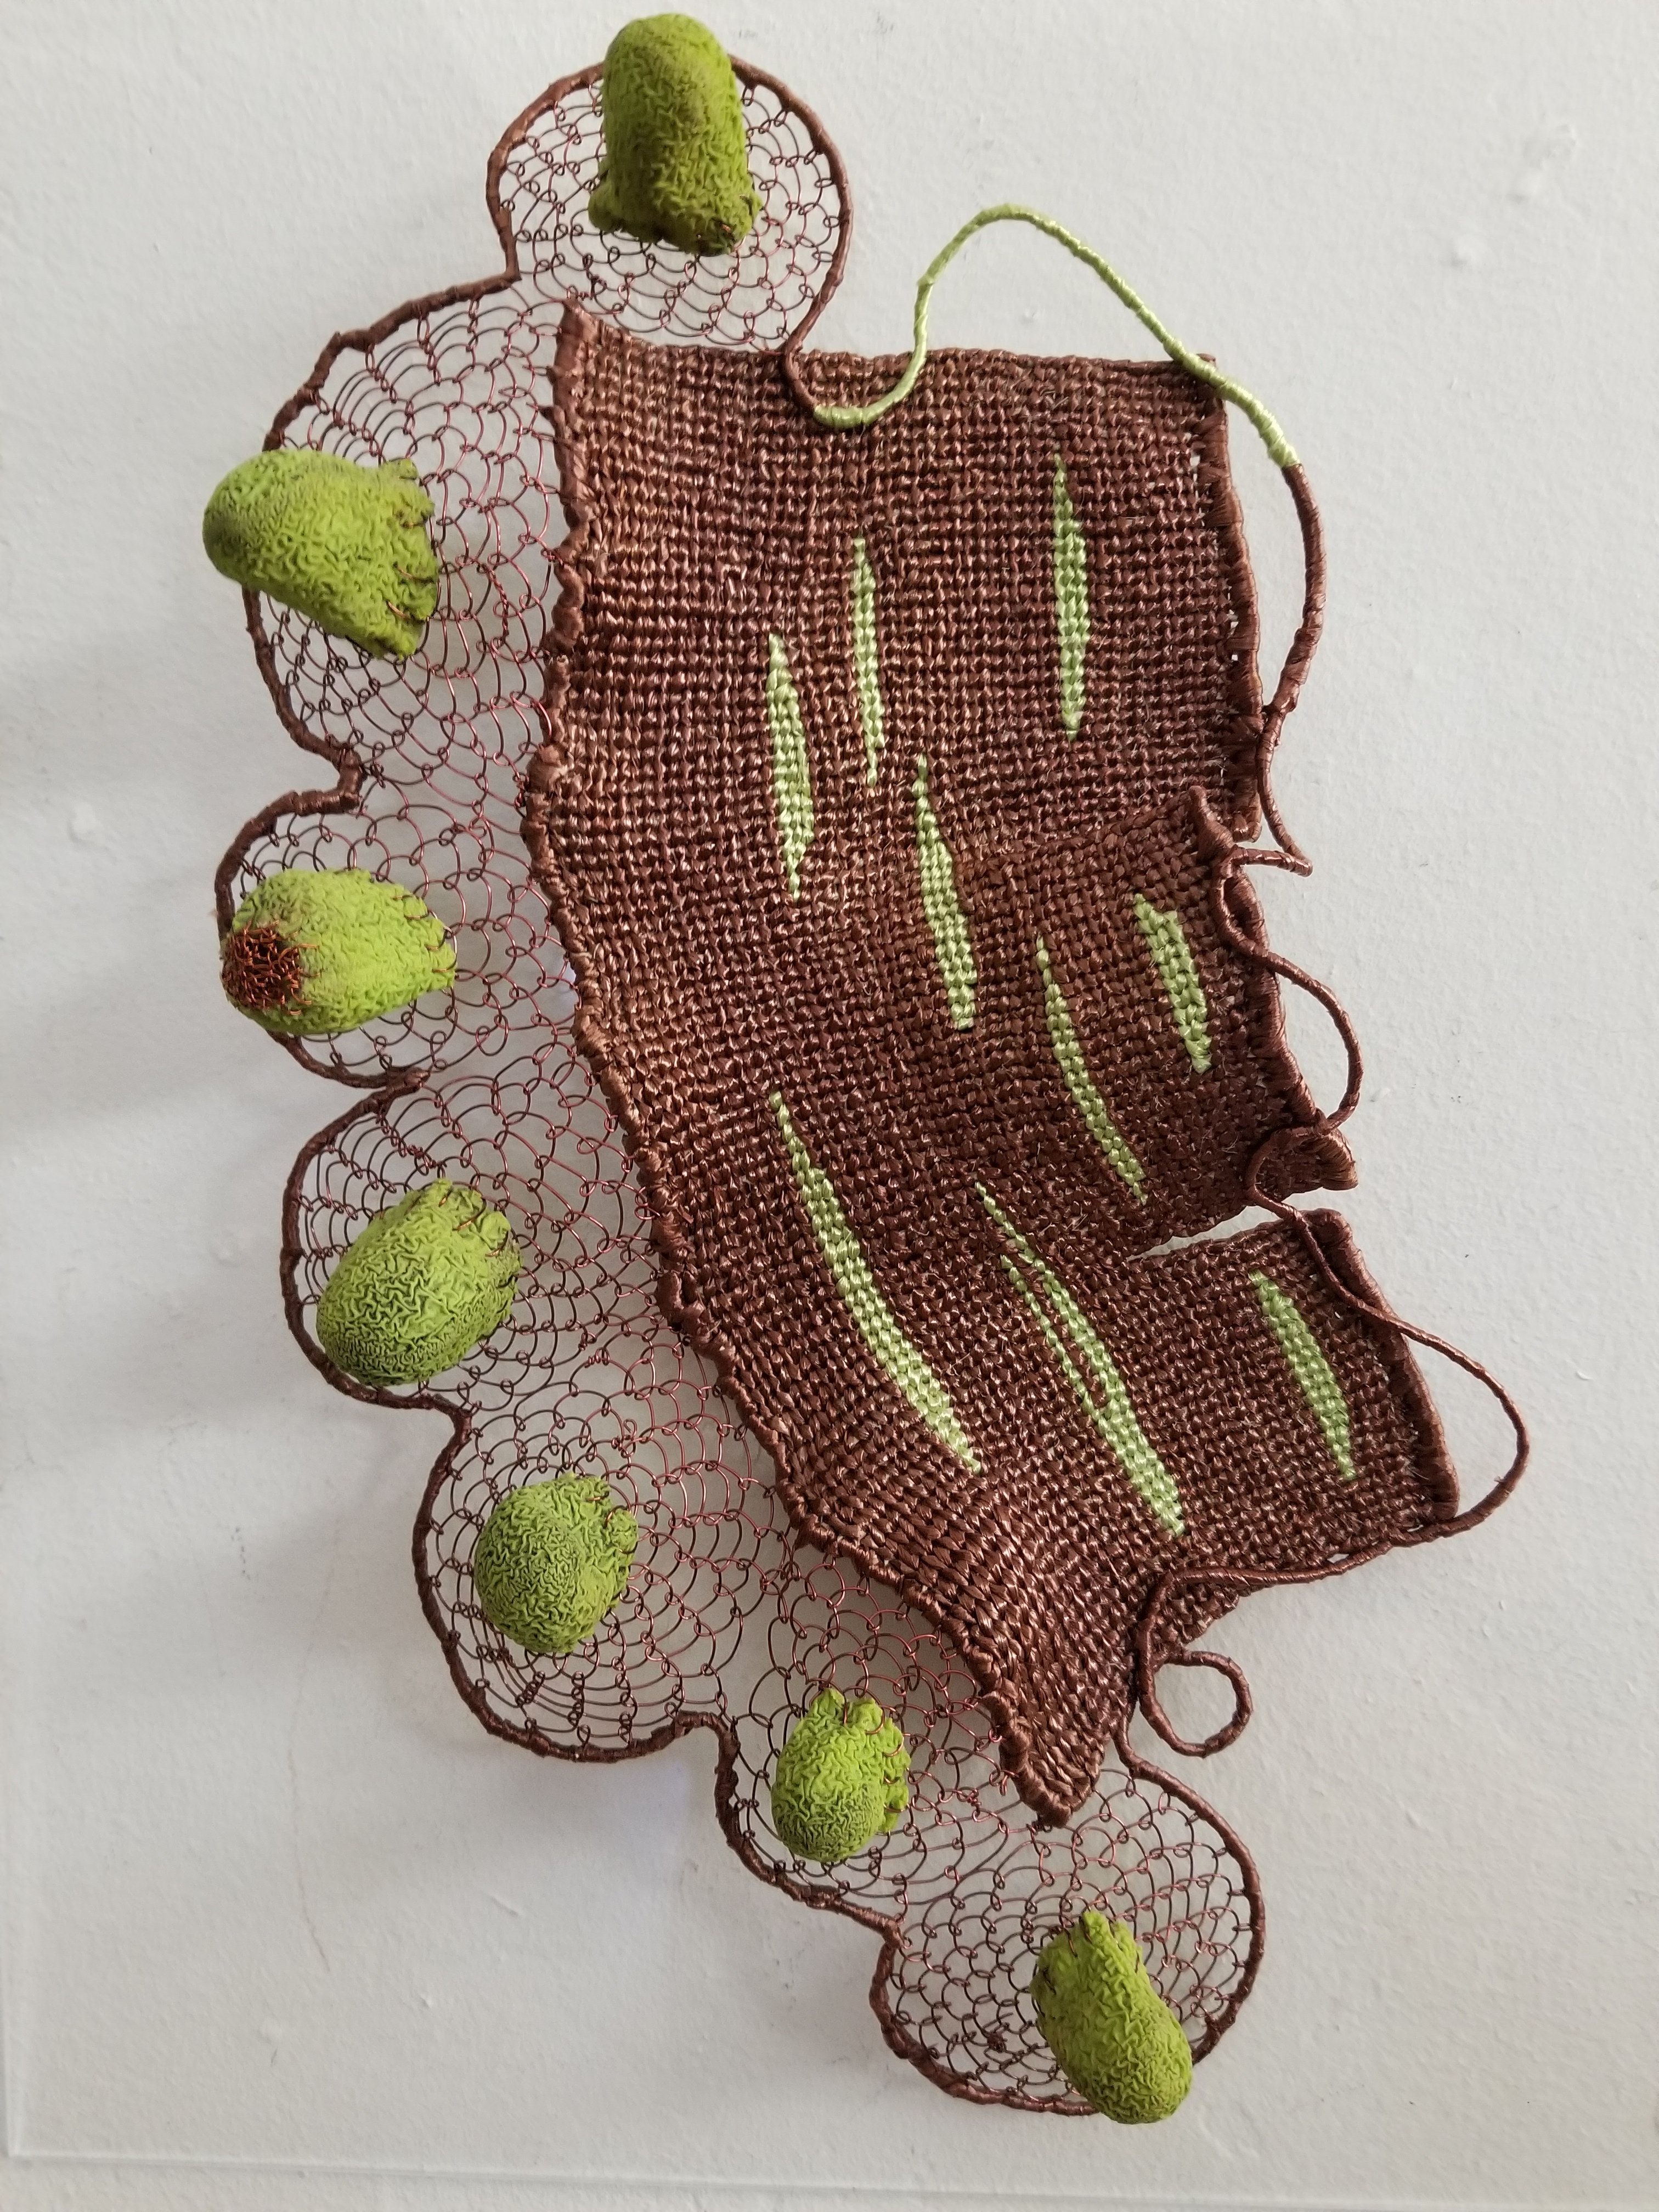 Polly Giacchina, Counting on Your Fingers. Vintage raffia and discarded garden gloves mounted on plexi glass, 14" x 11" x 1".